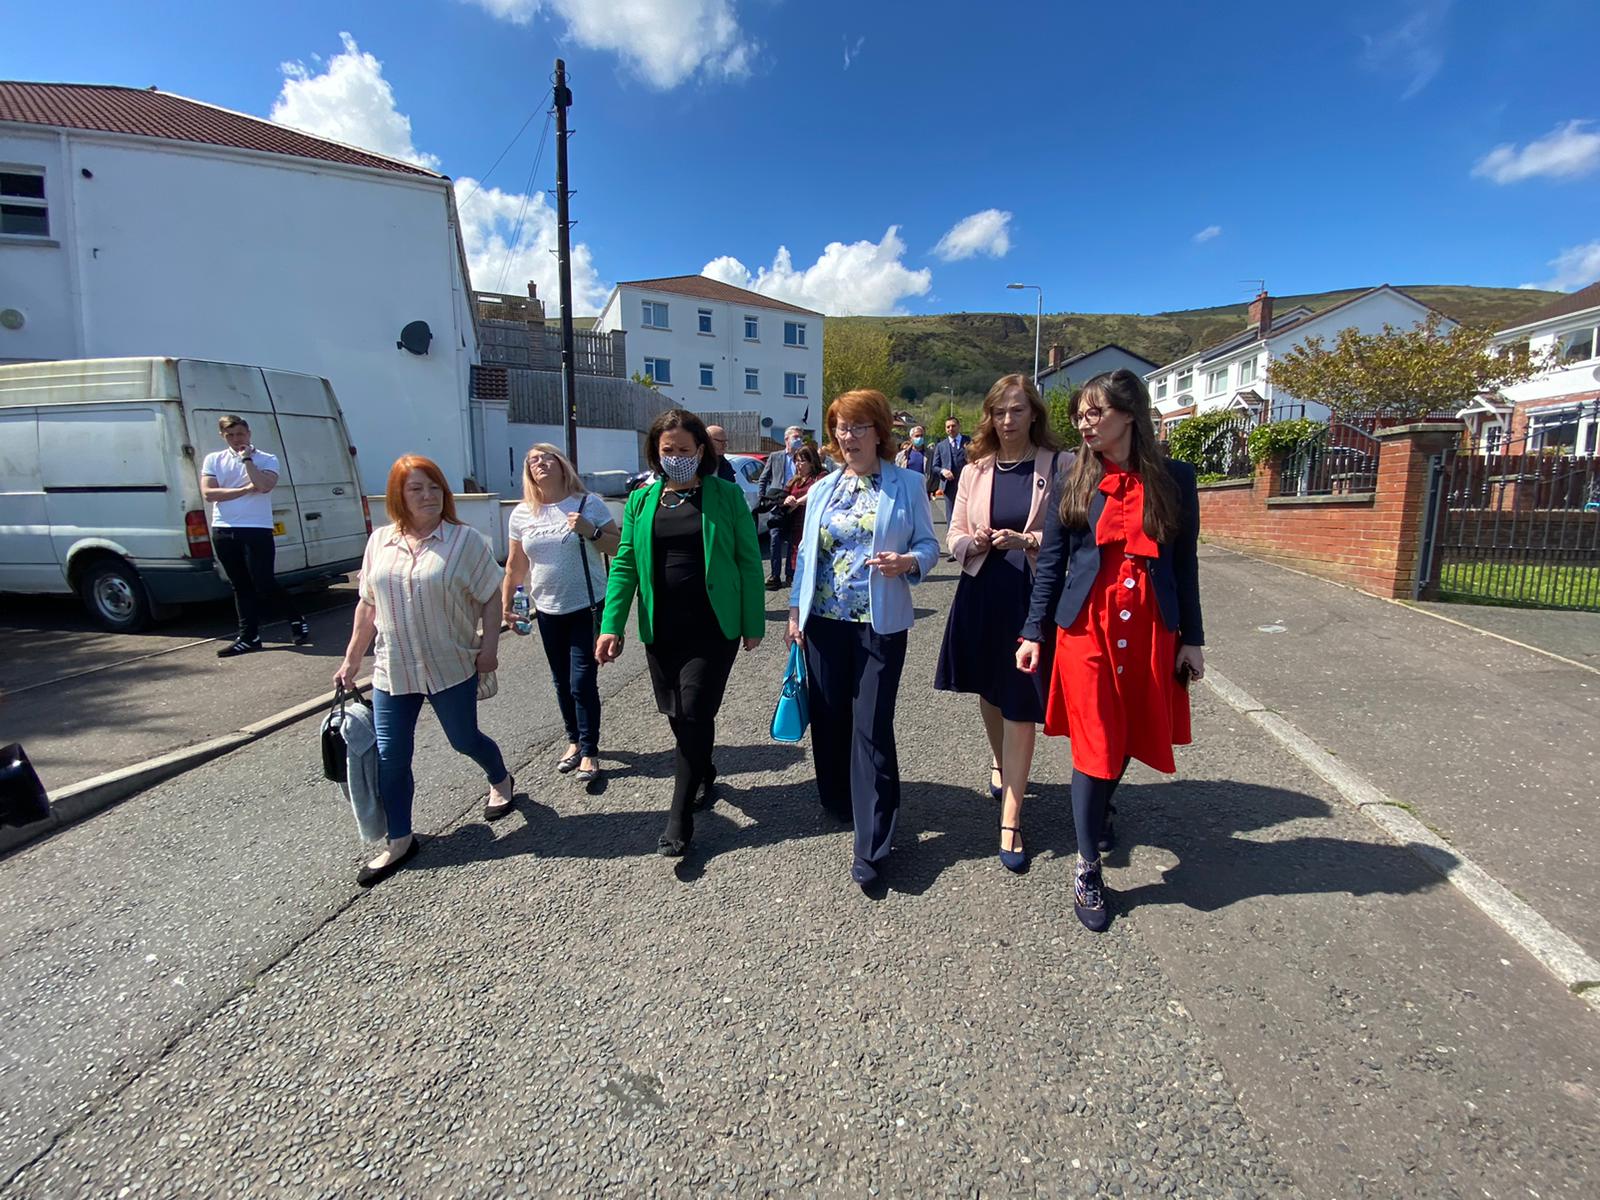 SUPPORT: Sinn Féin President Mary Lou McDonald is accompanied by Ballymurphy Massacre families as she visits the site of two of shootings